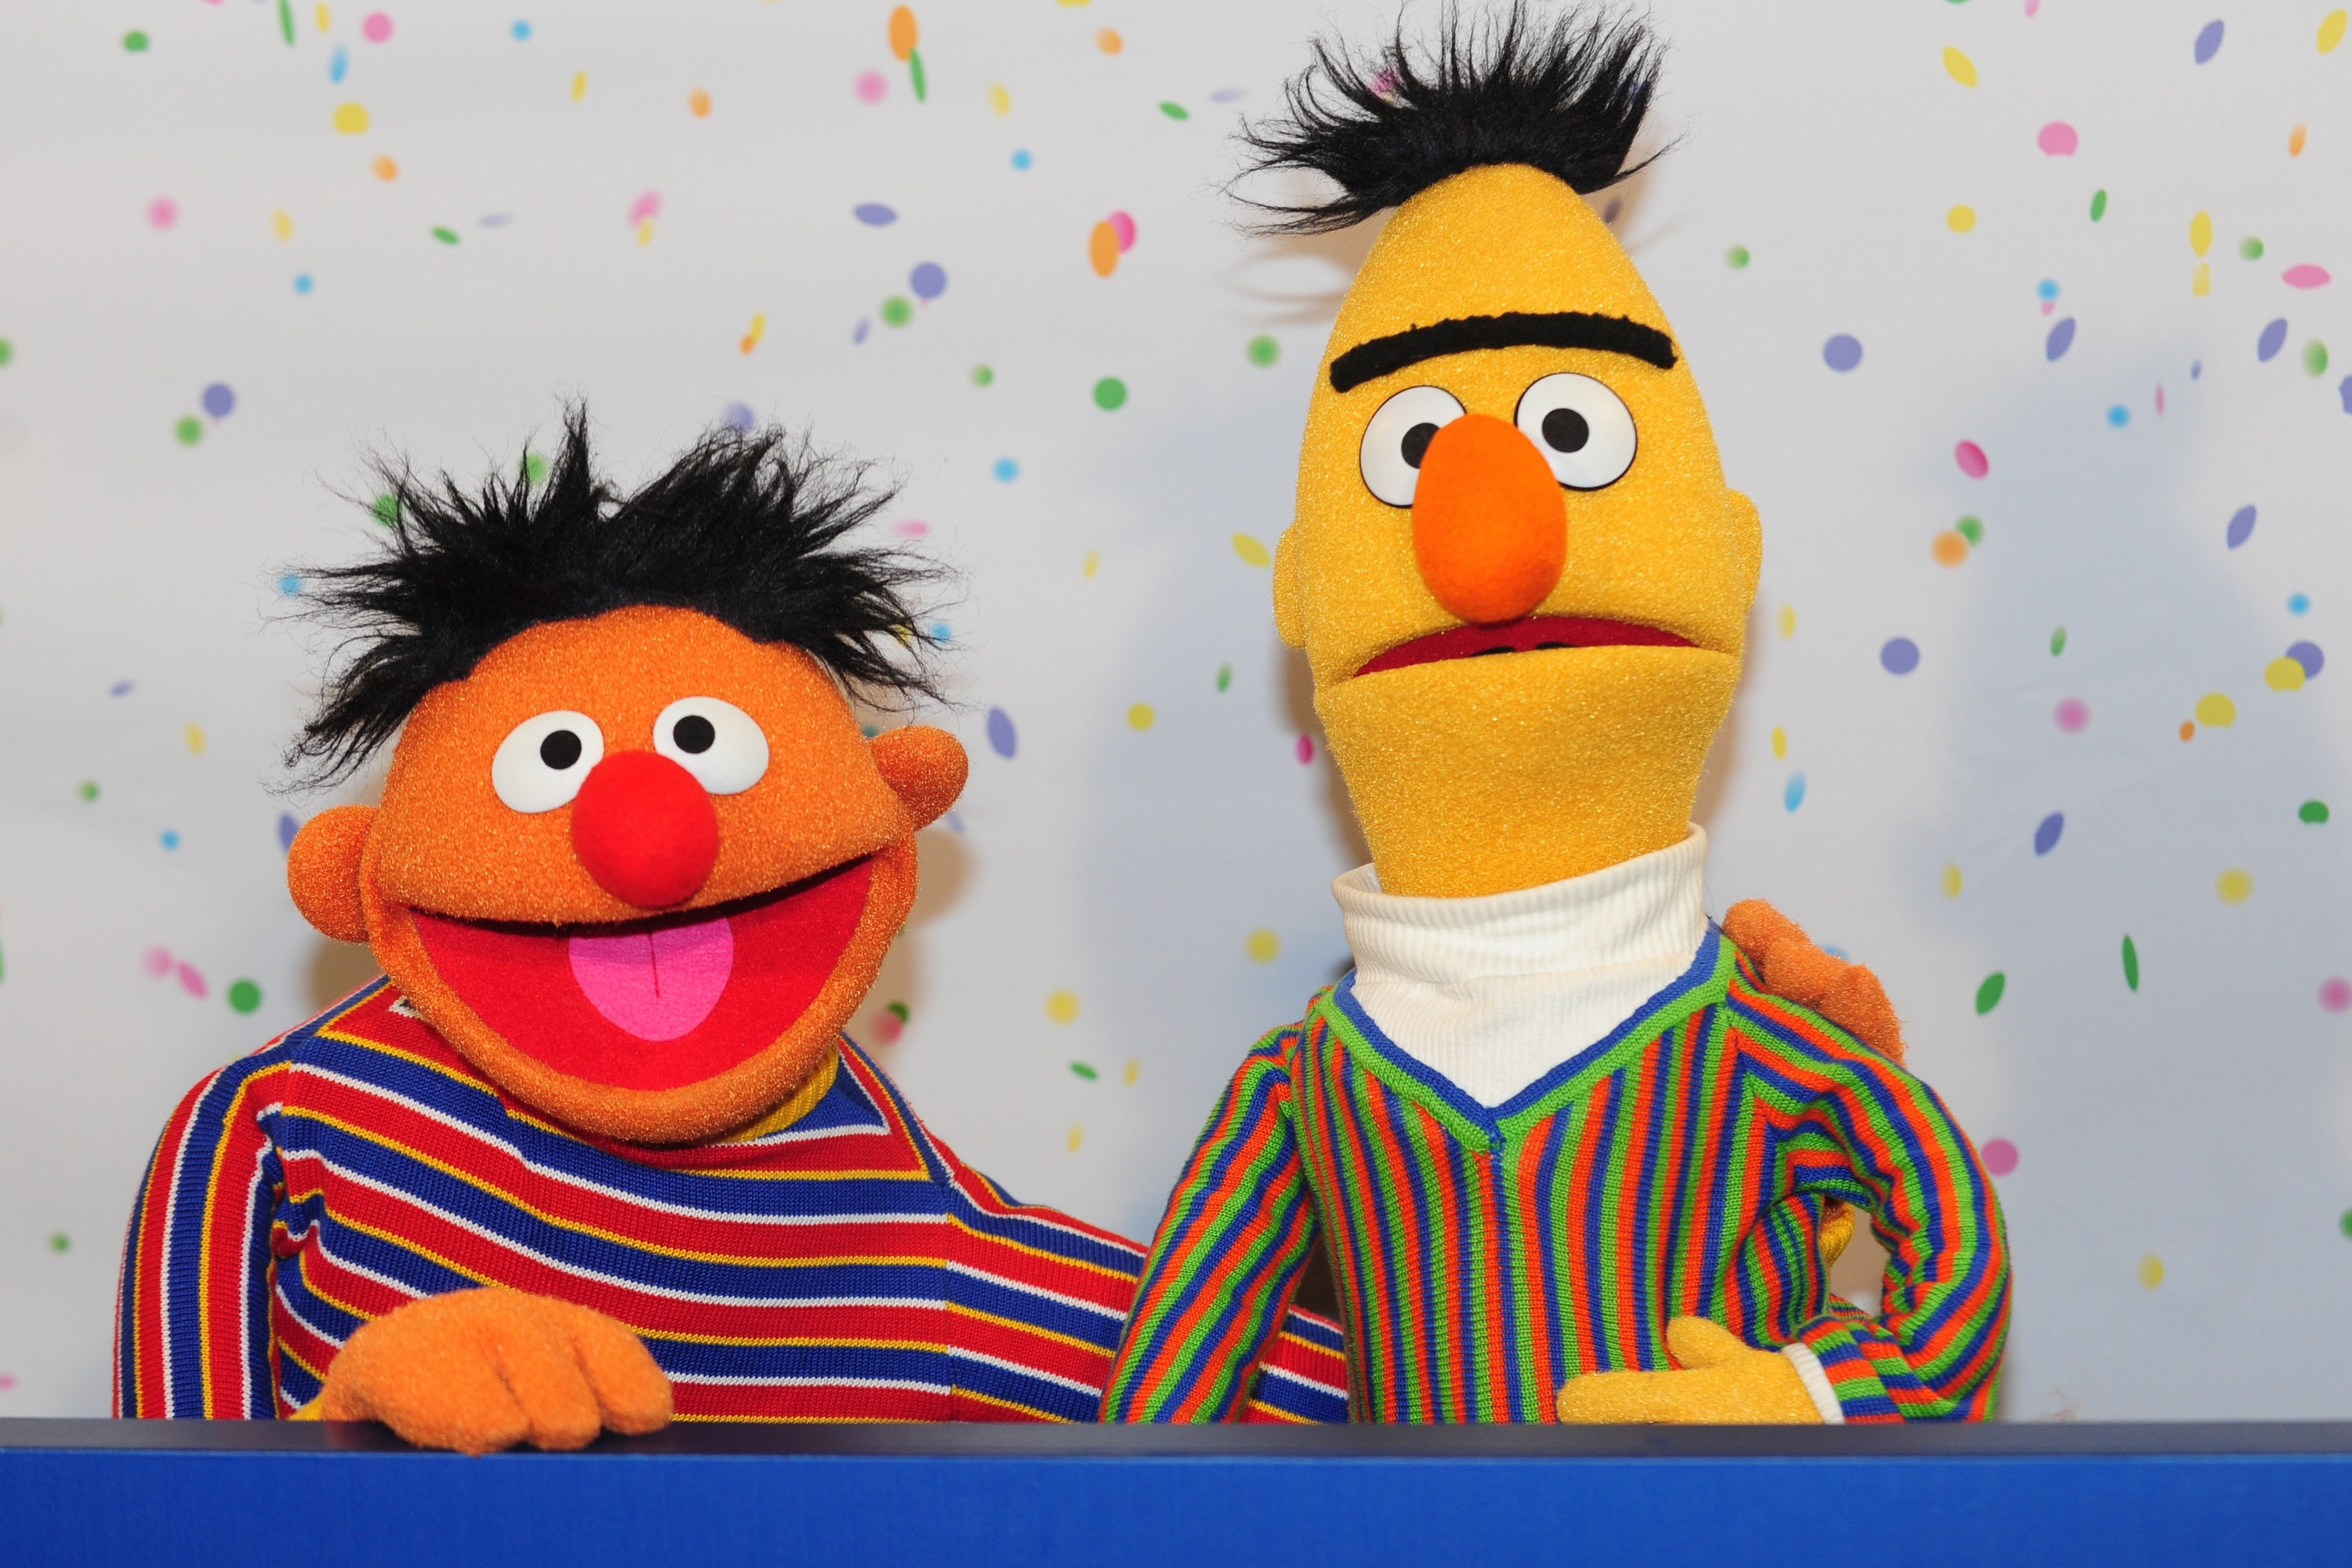 Sesame Street Muppets Ernie and Bert pose for photographs during a press conference on the 40th anniversary of the Sesame Street in Hamburg, Germany, 07 January 2013. (Getty Images)